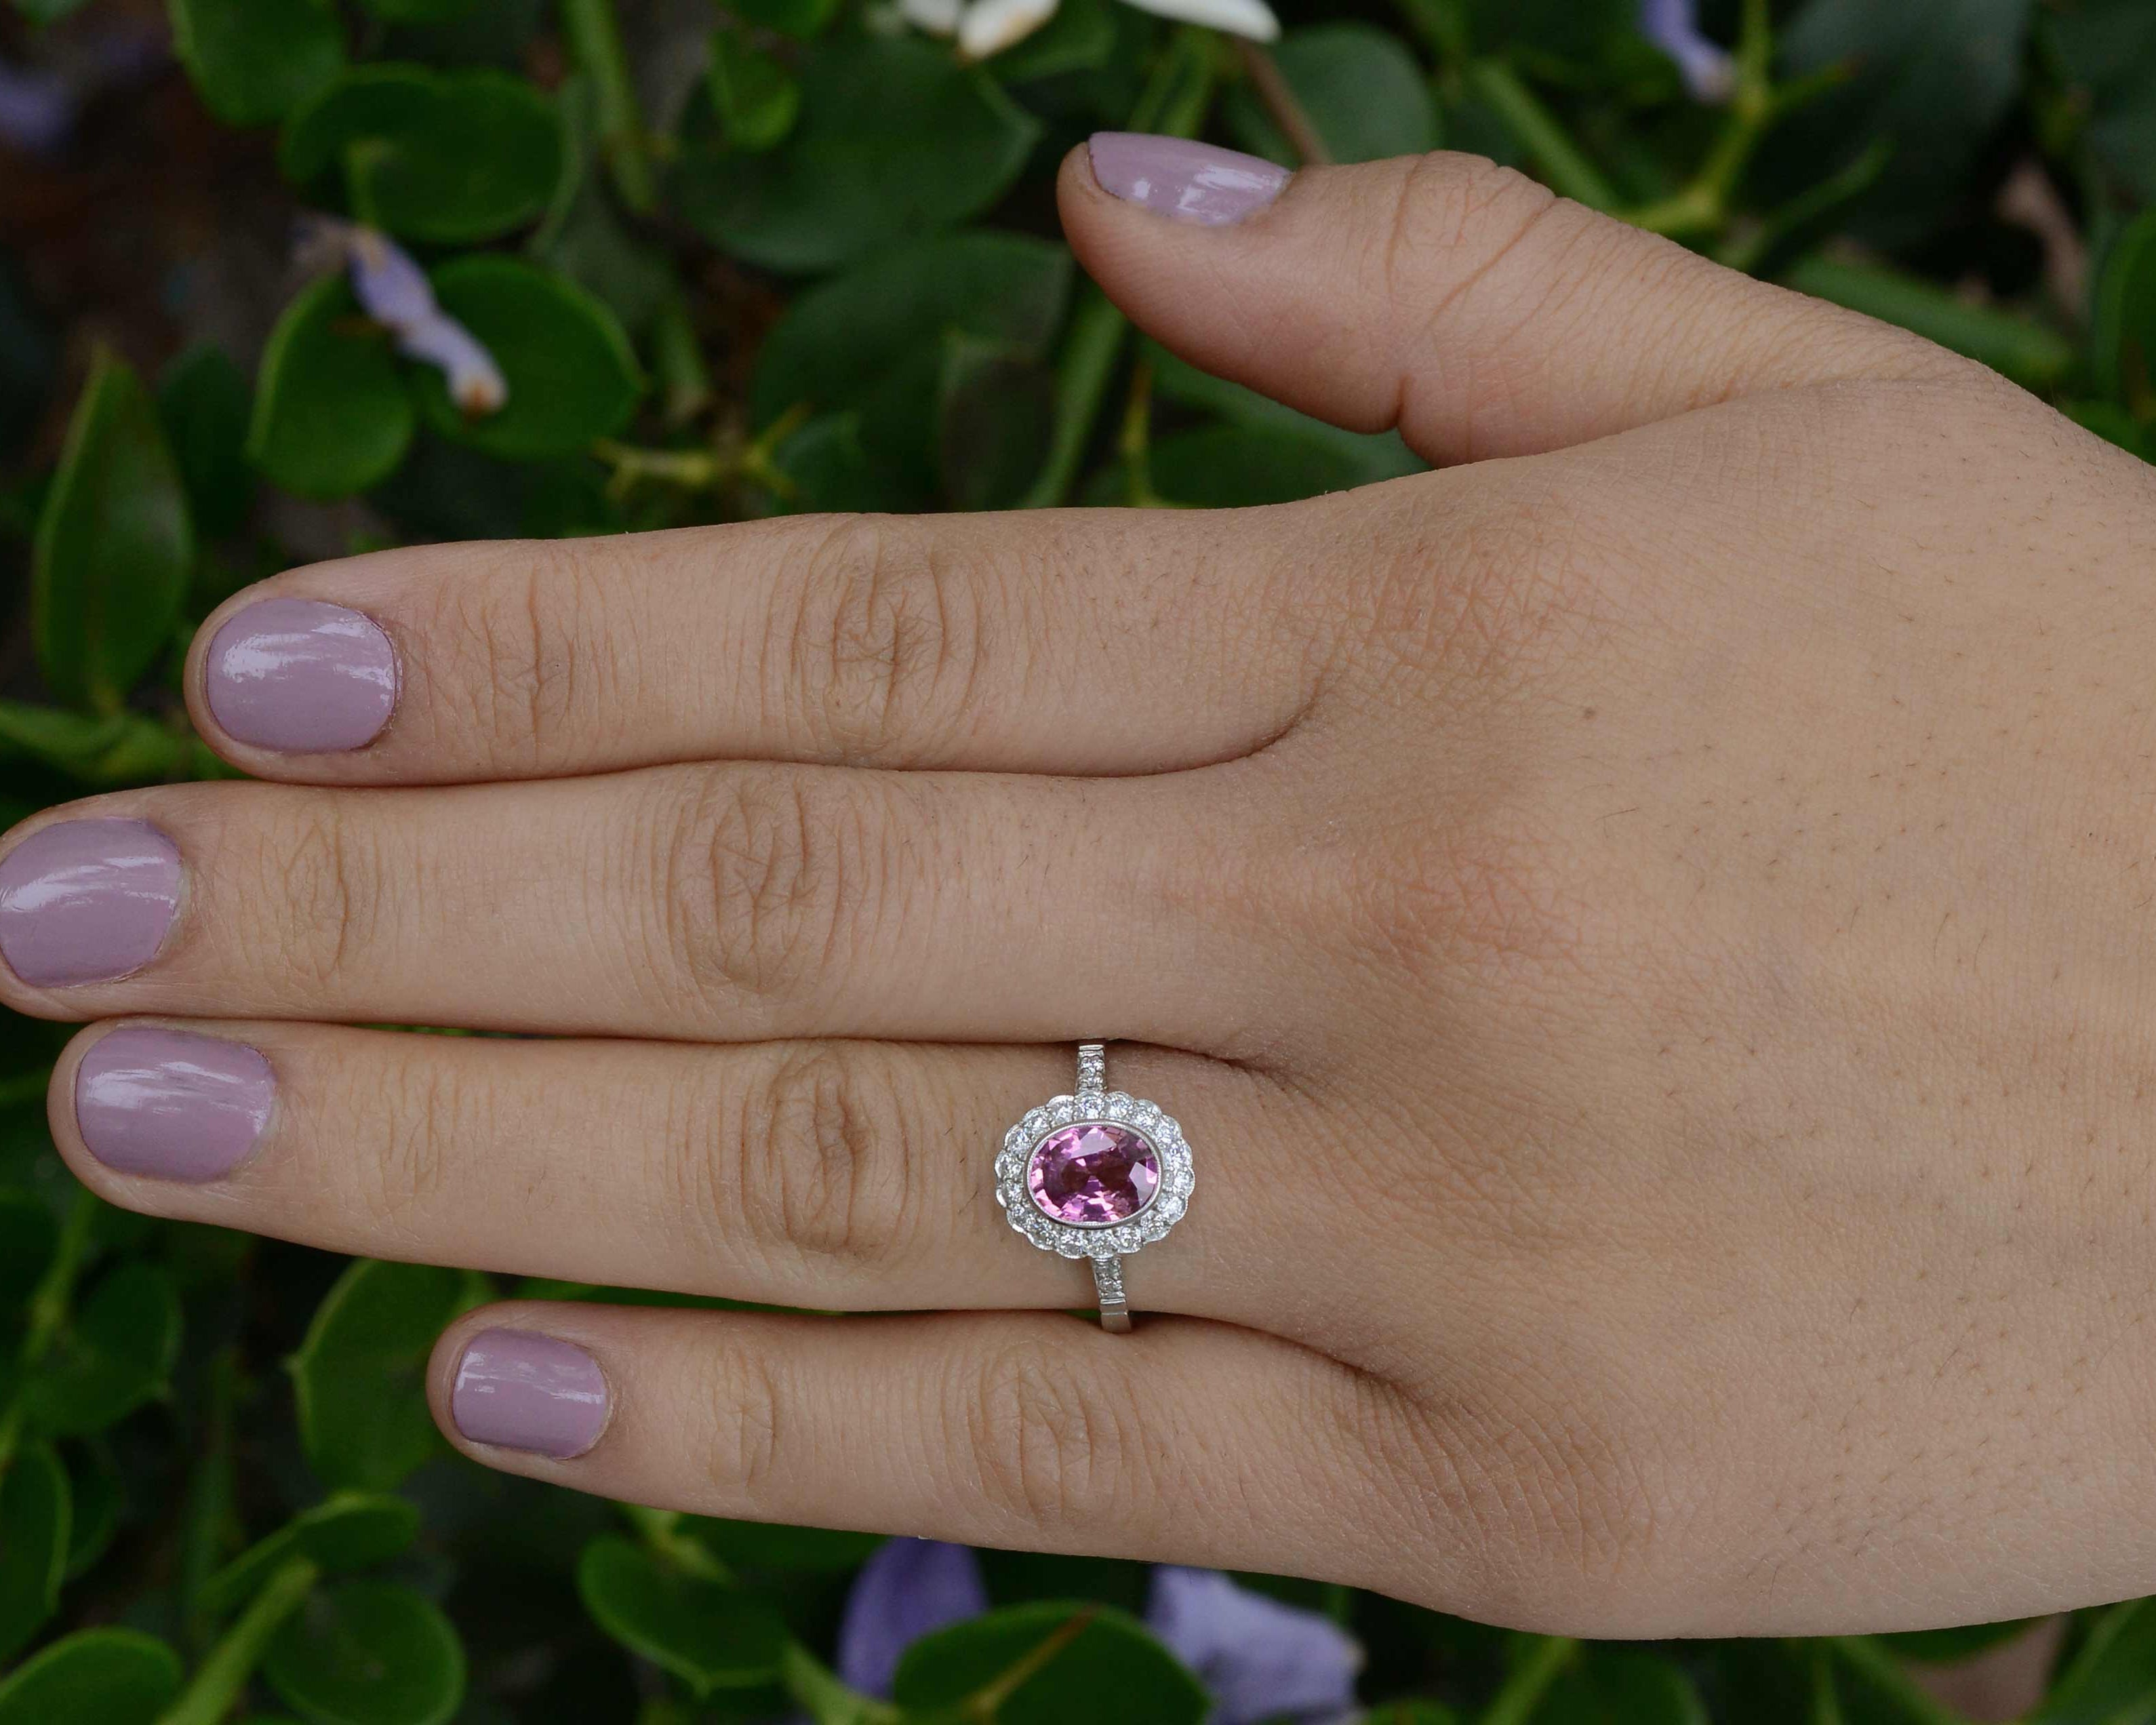 A natural pink 1.50 carat oval pink sapphire wedding ring.